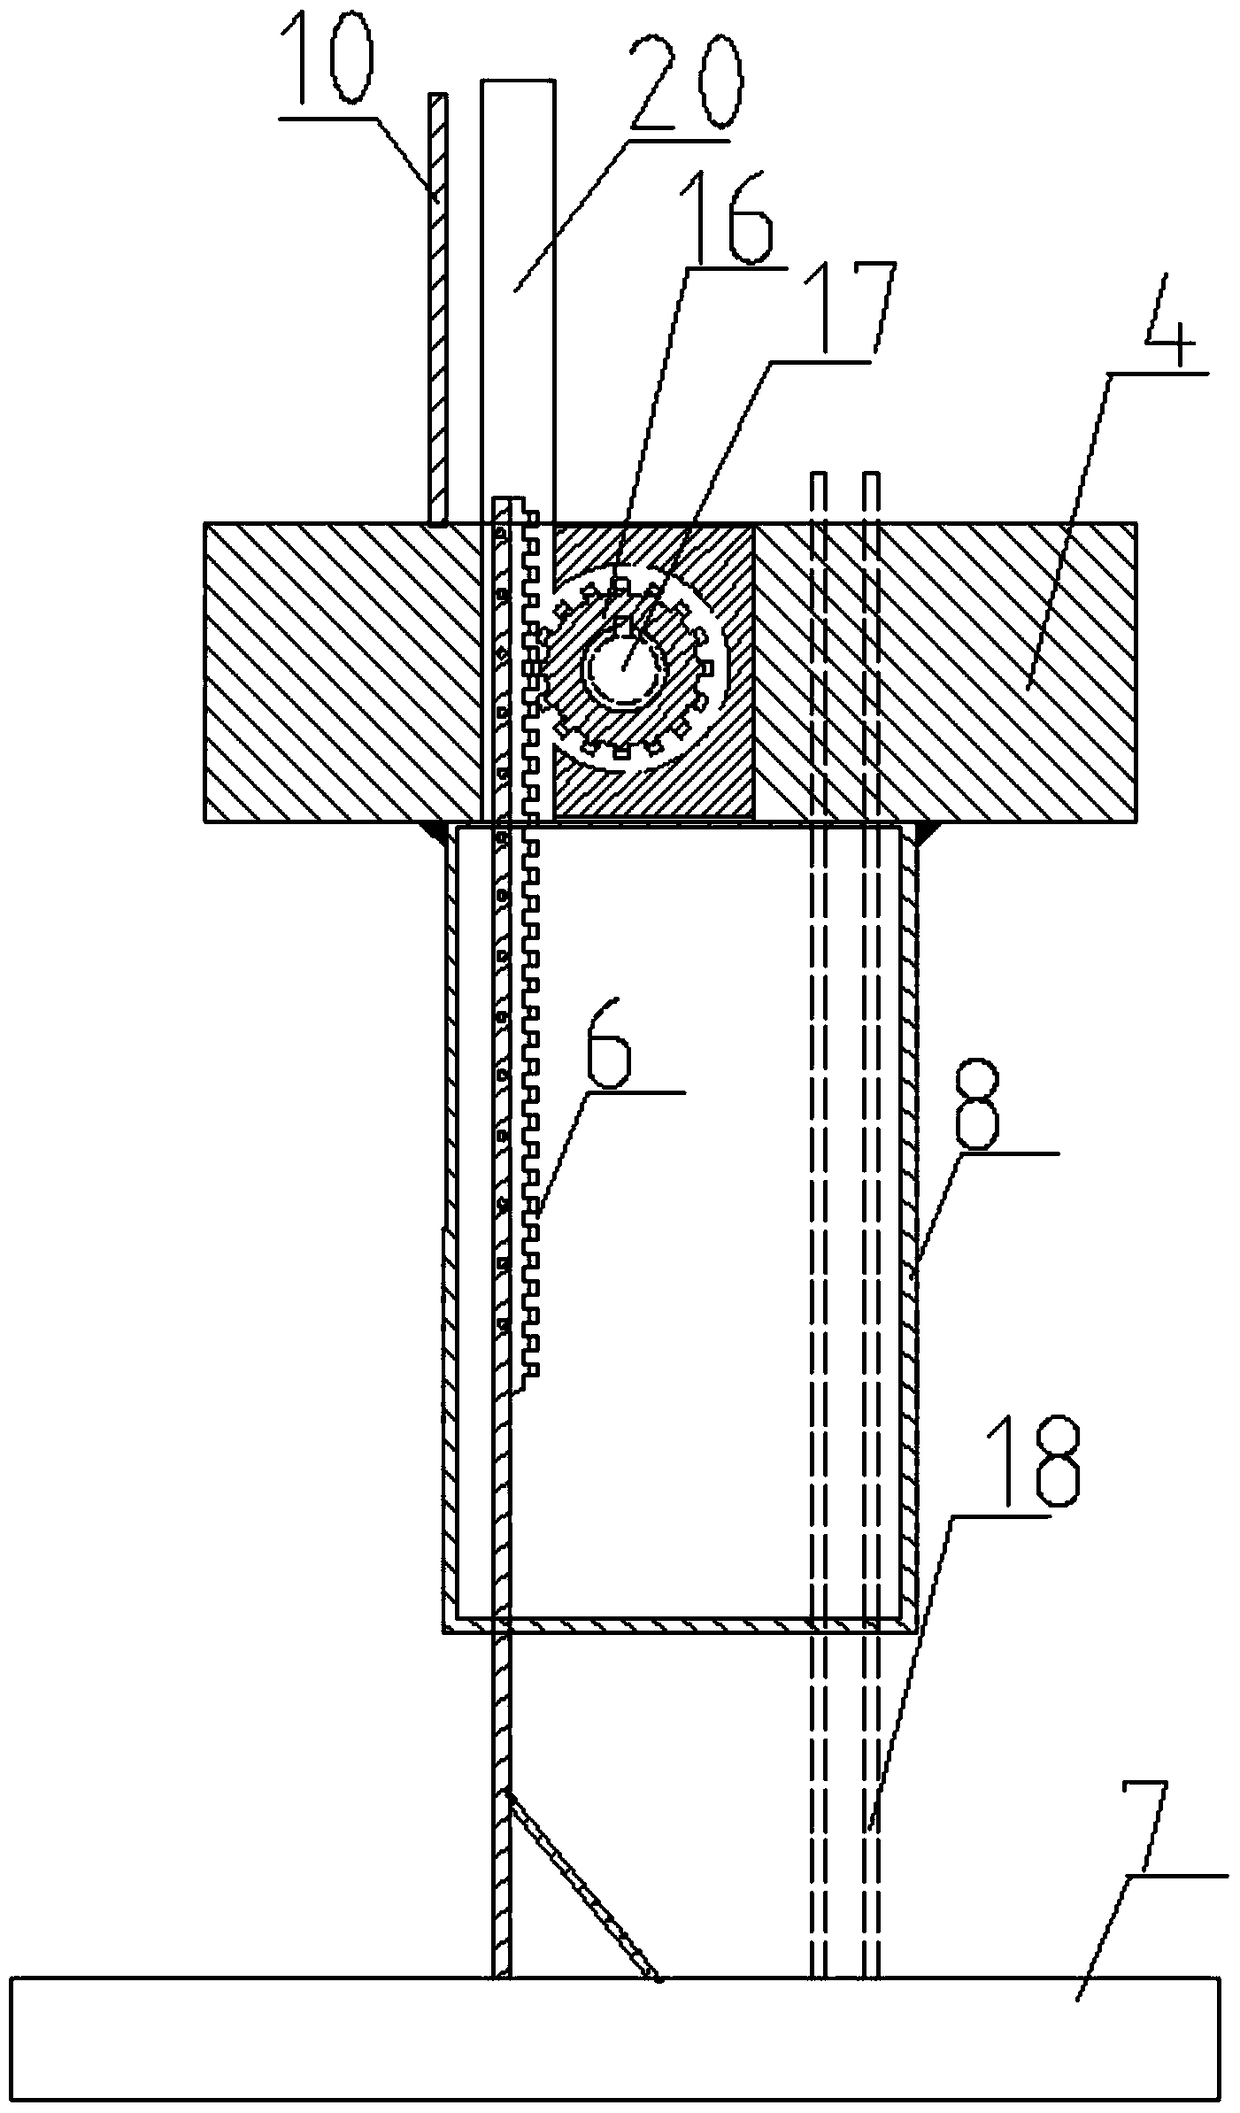 A Flow Measuring System with Adjustable Measuring Position